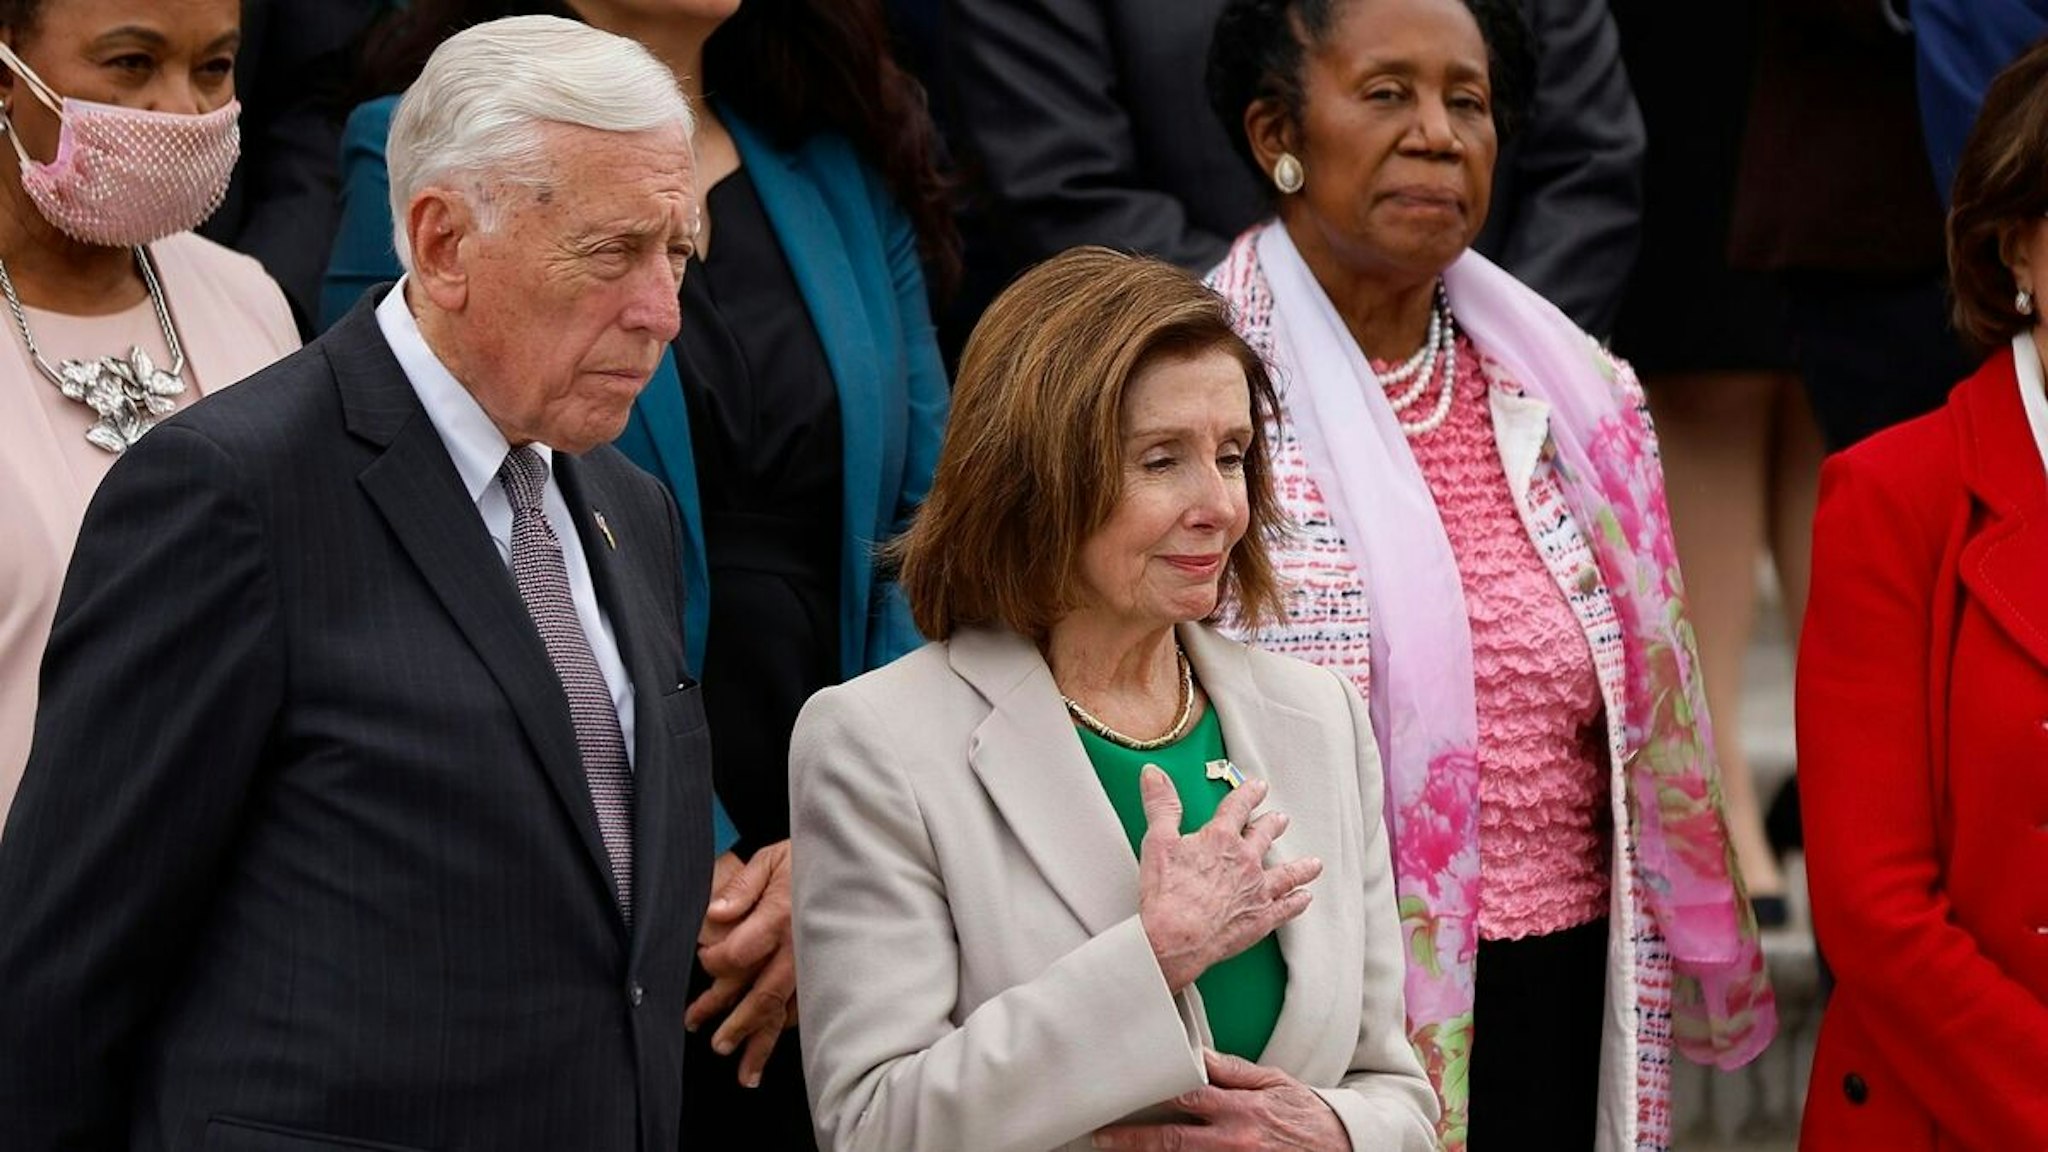 WASHINGTON, DC - MAY 12: House Majority Leader Steny Hoyer (D-MD) (L) and Speaker of the House Nancy Pelosi (D-CA) lead Democratic members of the House of Representatives in observing a moment of silence to mark one million American deaths from the coronavirus on the East Front of the U.S. Capitol May 12, 2022 in Washington, DC. According to Johns Hopkins University, as of Thursday the COVID-19 pandemic has killed 998,824 Americans and claimed more than 6.2 million lives around the world.